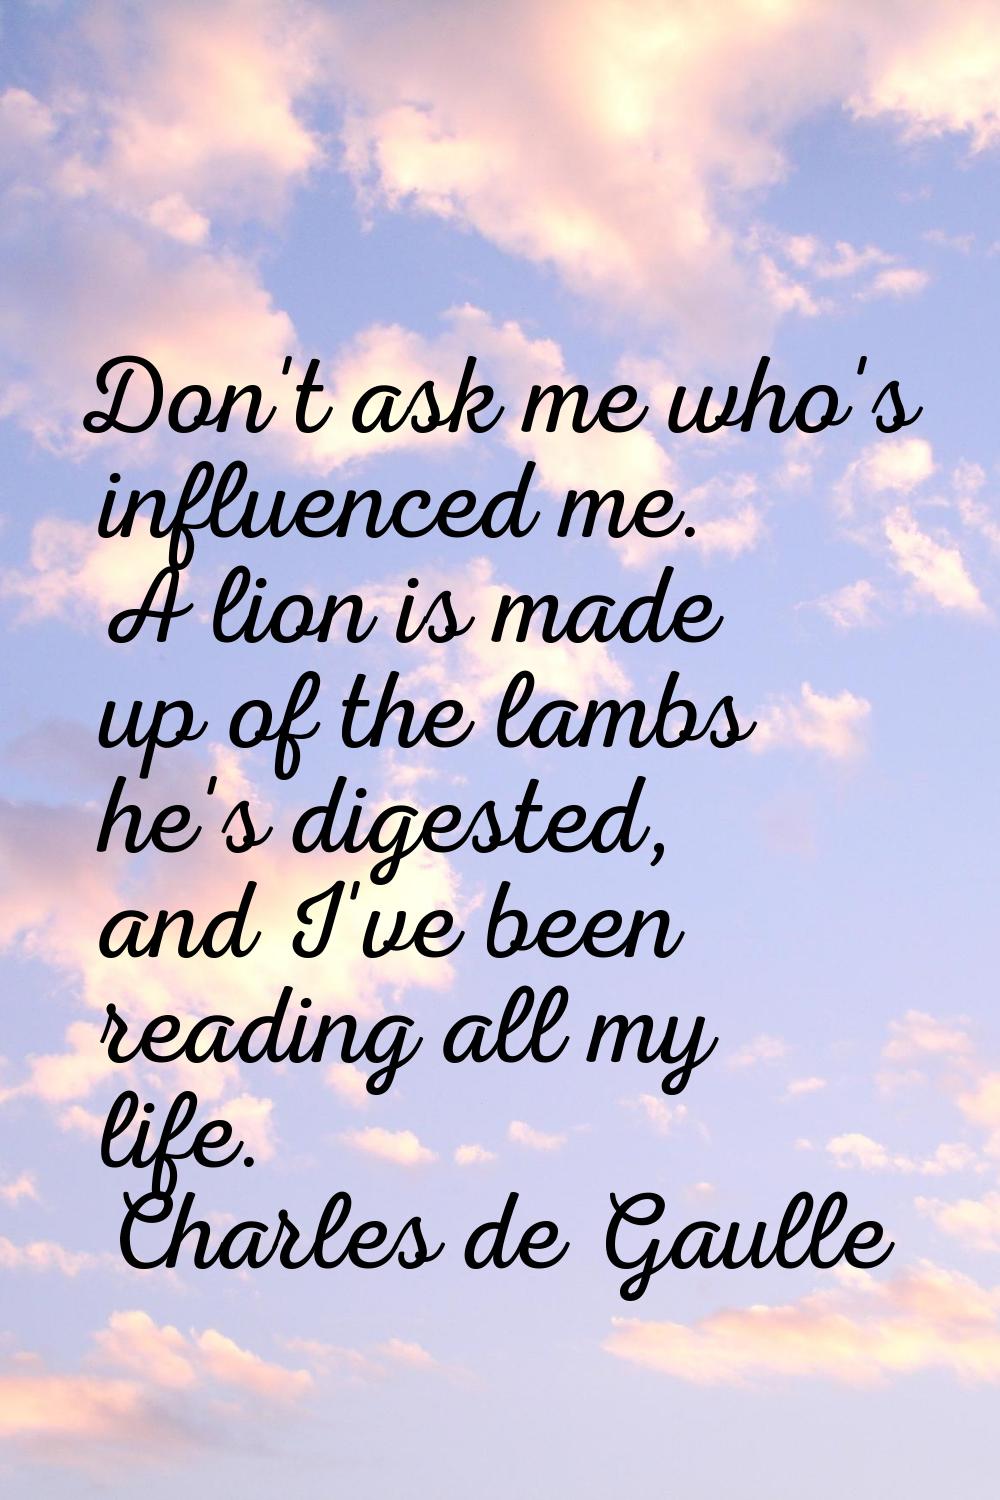 Don't ask me who's influenced me. A lion is made up of the lambs he's digested, and I've been readi